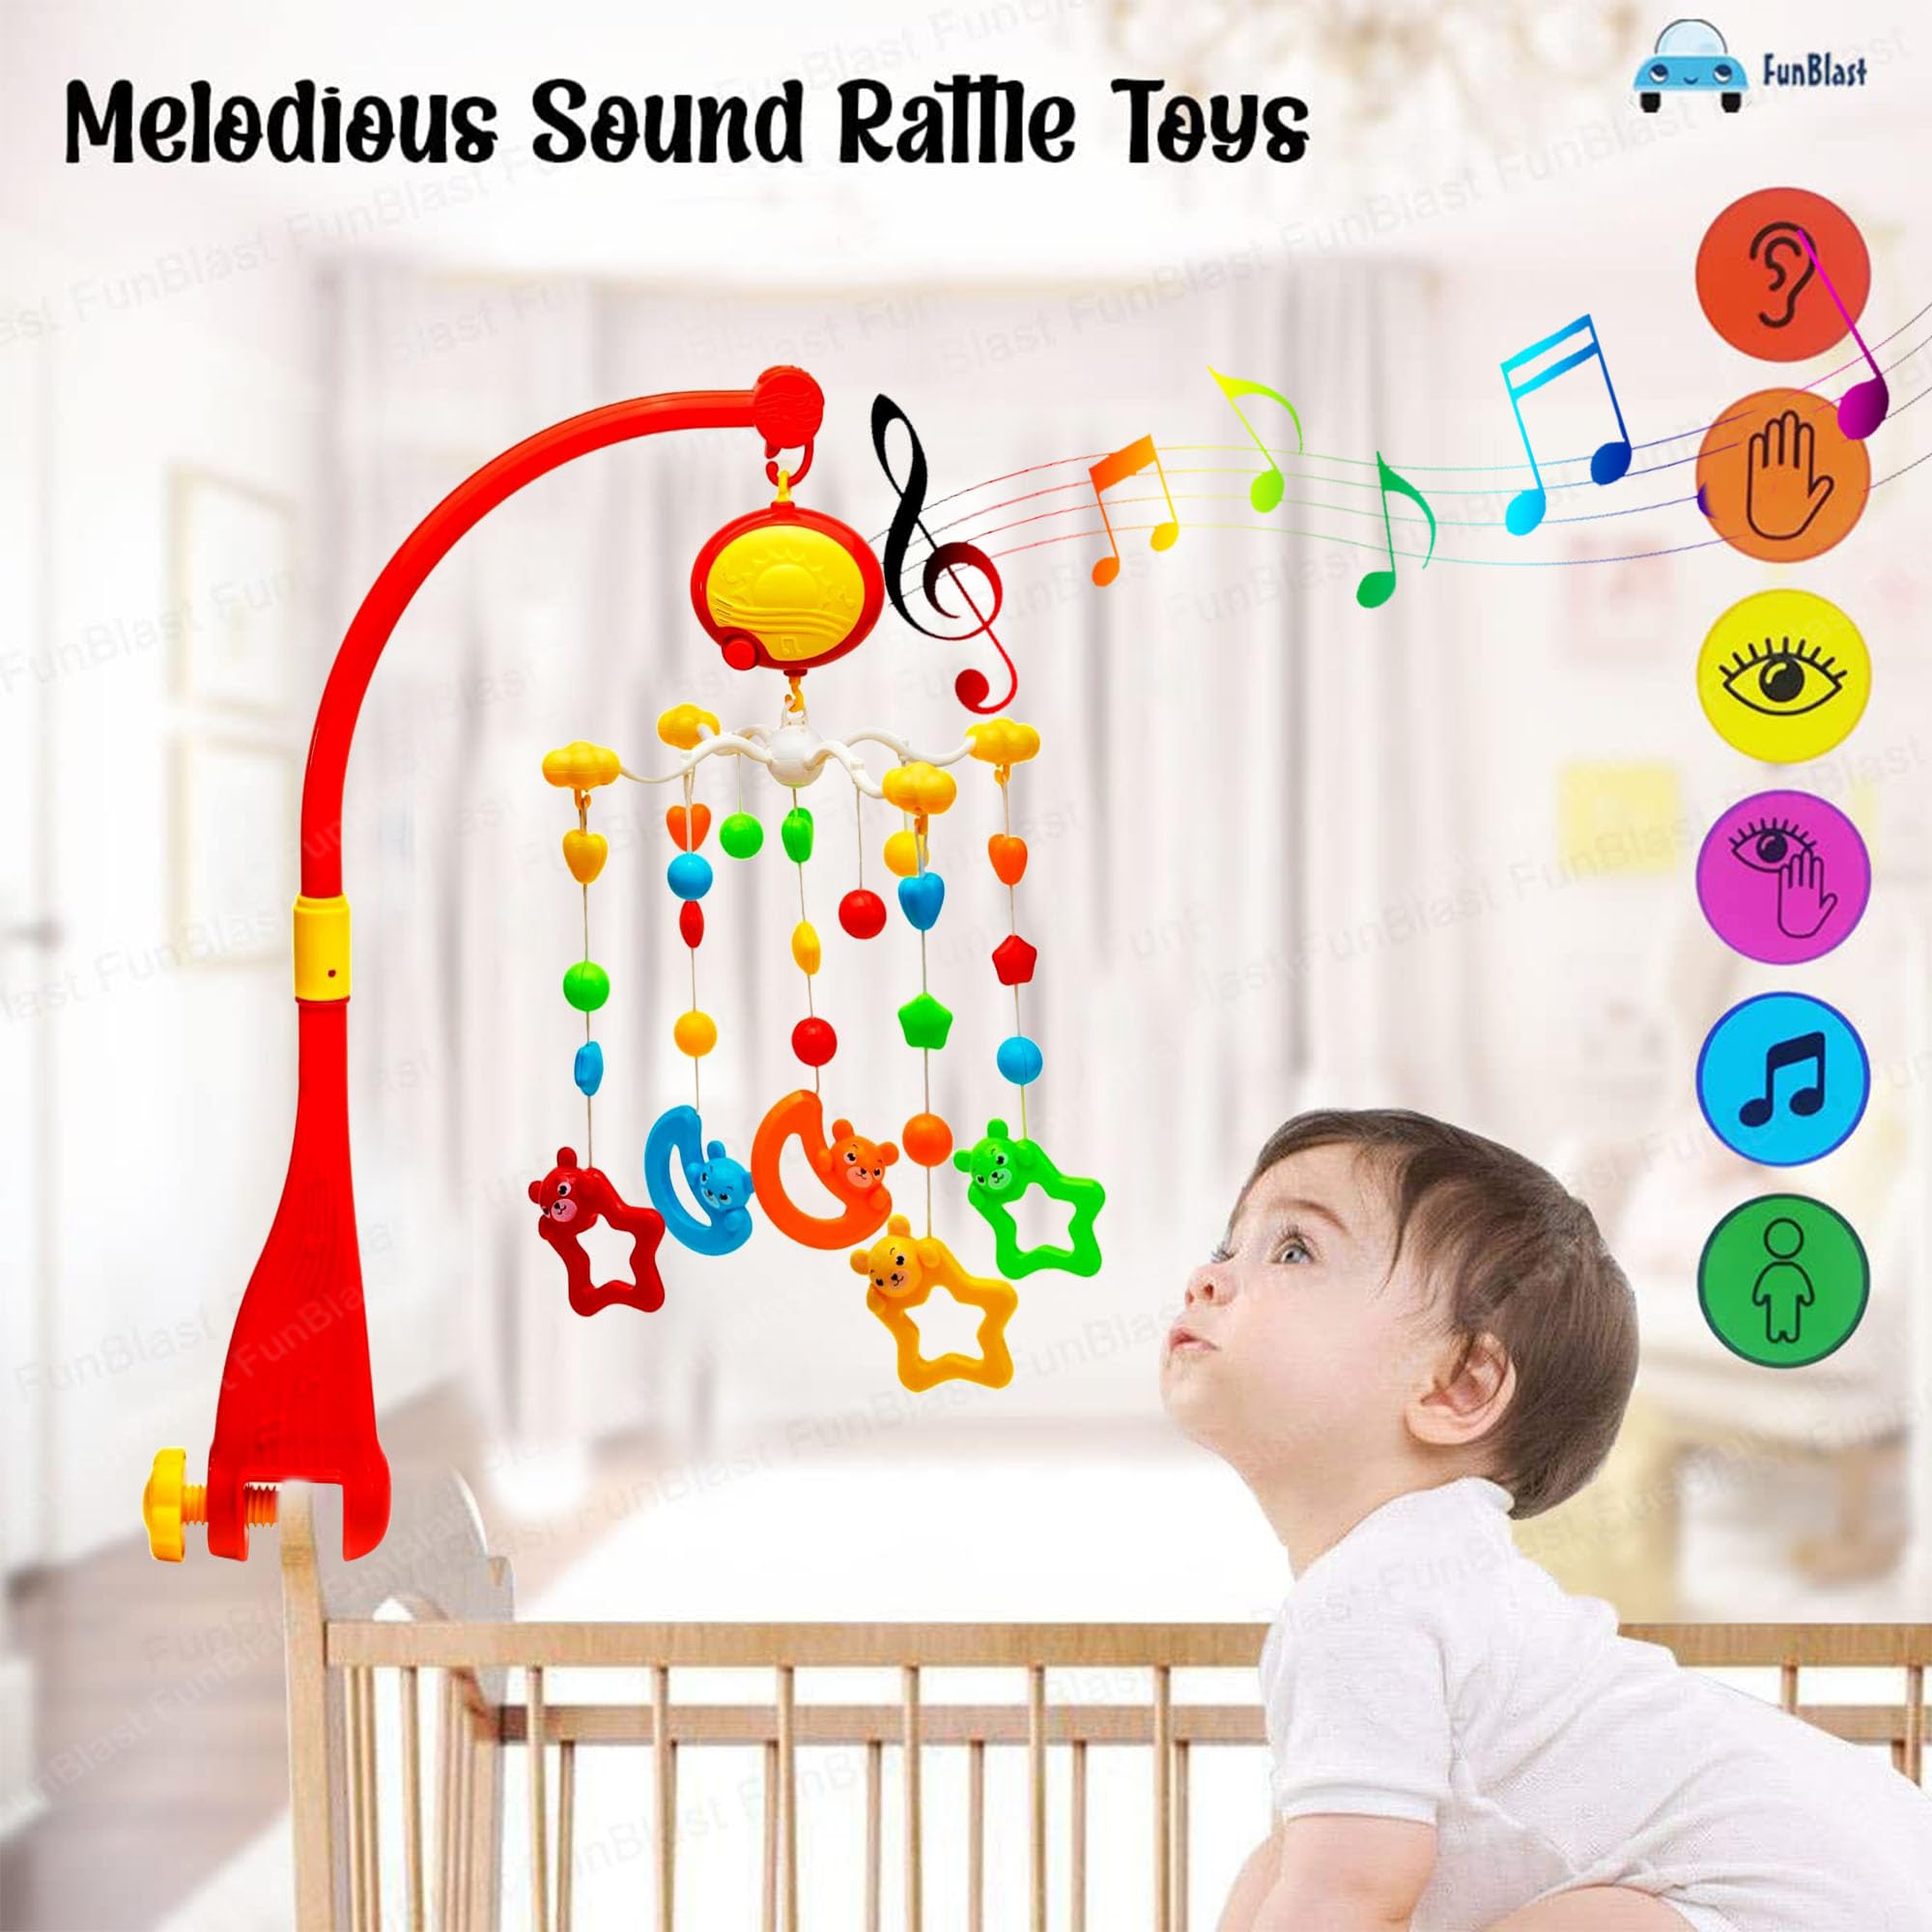 FunBlast Musical Bed Bell Cot Hanging Rotational Rattle Toy for Baby – Battery Operated Rattle Toys for New Born Babies and Toddlers, Baby Hanging Crib Cot Mobile for Infants 0-3 Months (Multicolor)